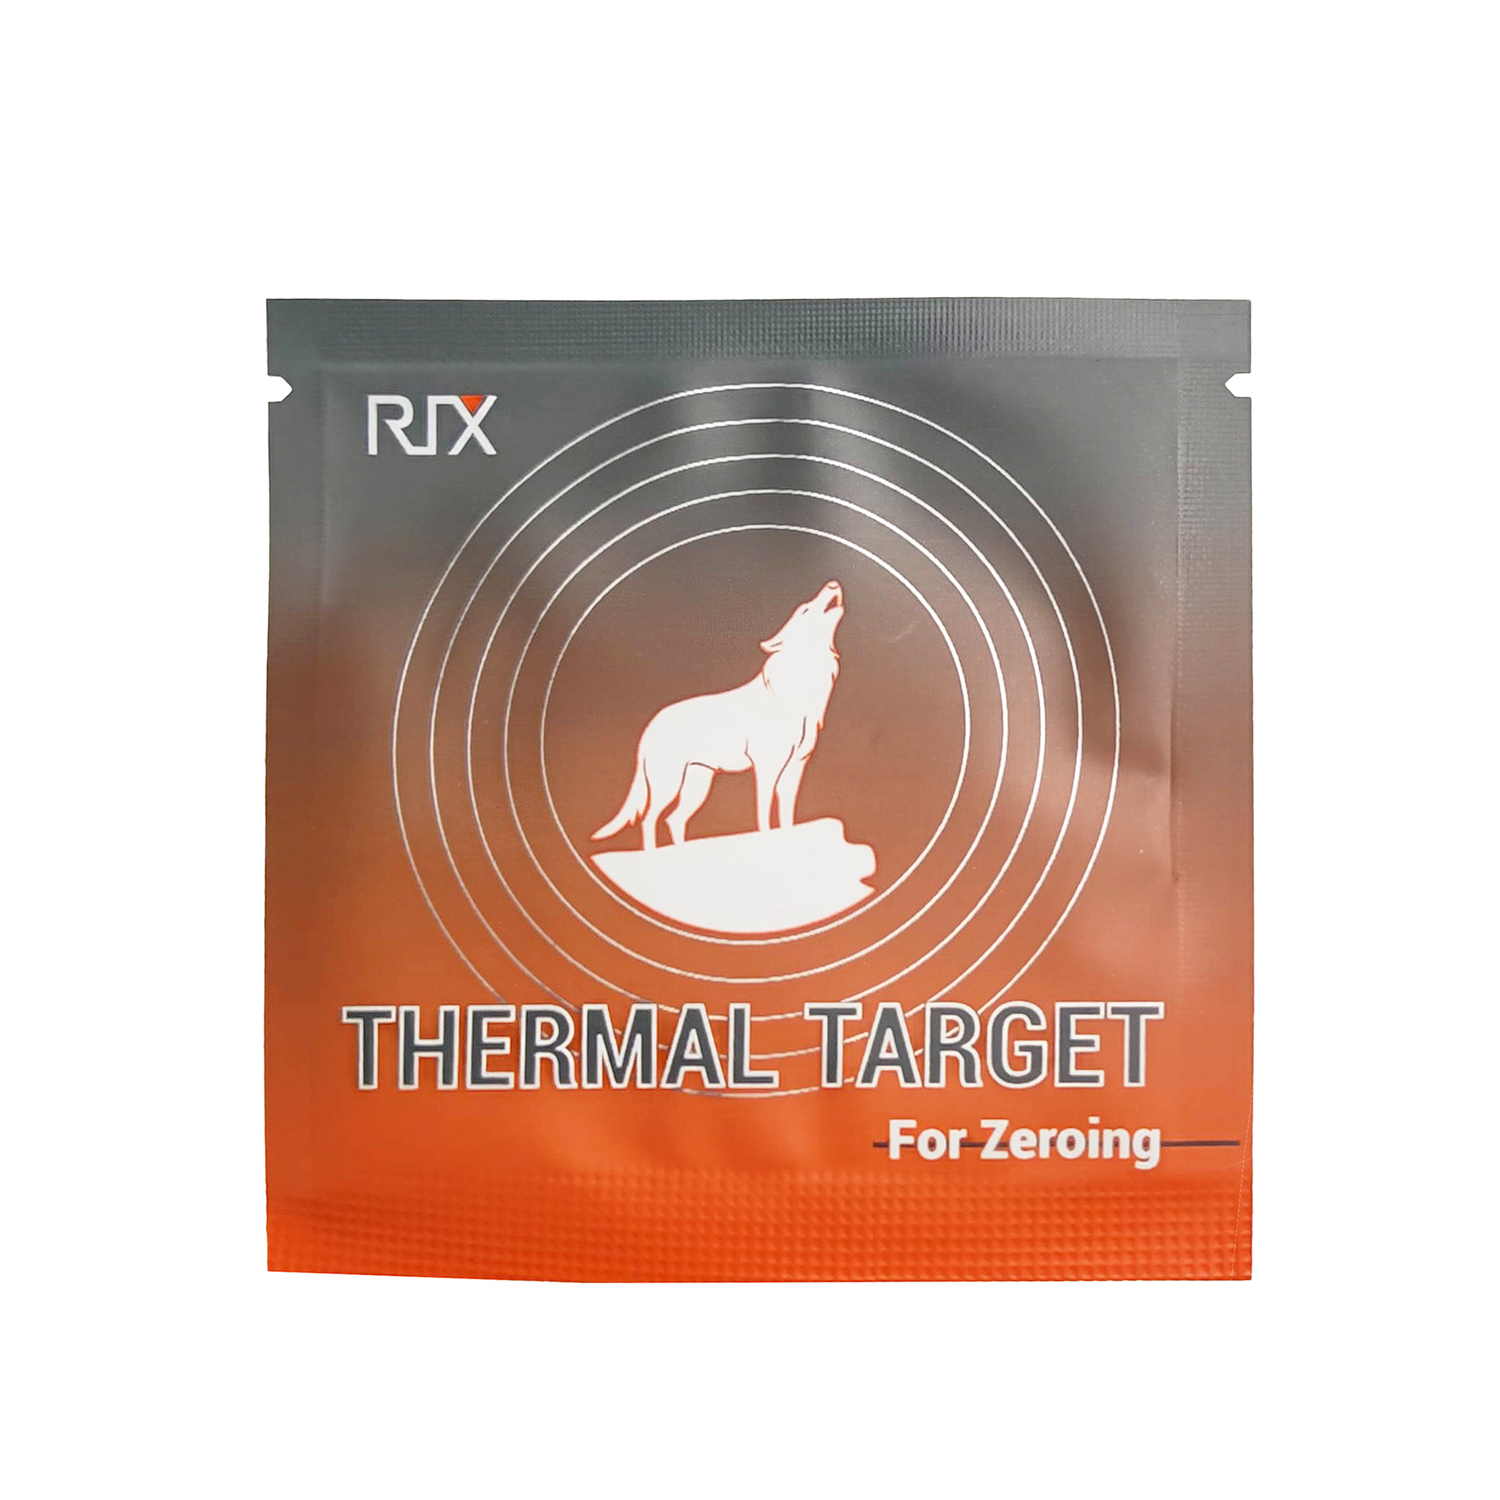 RIX Thermal Target for Zeroing (10pcs per pack)